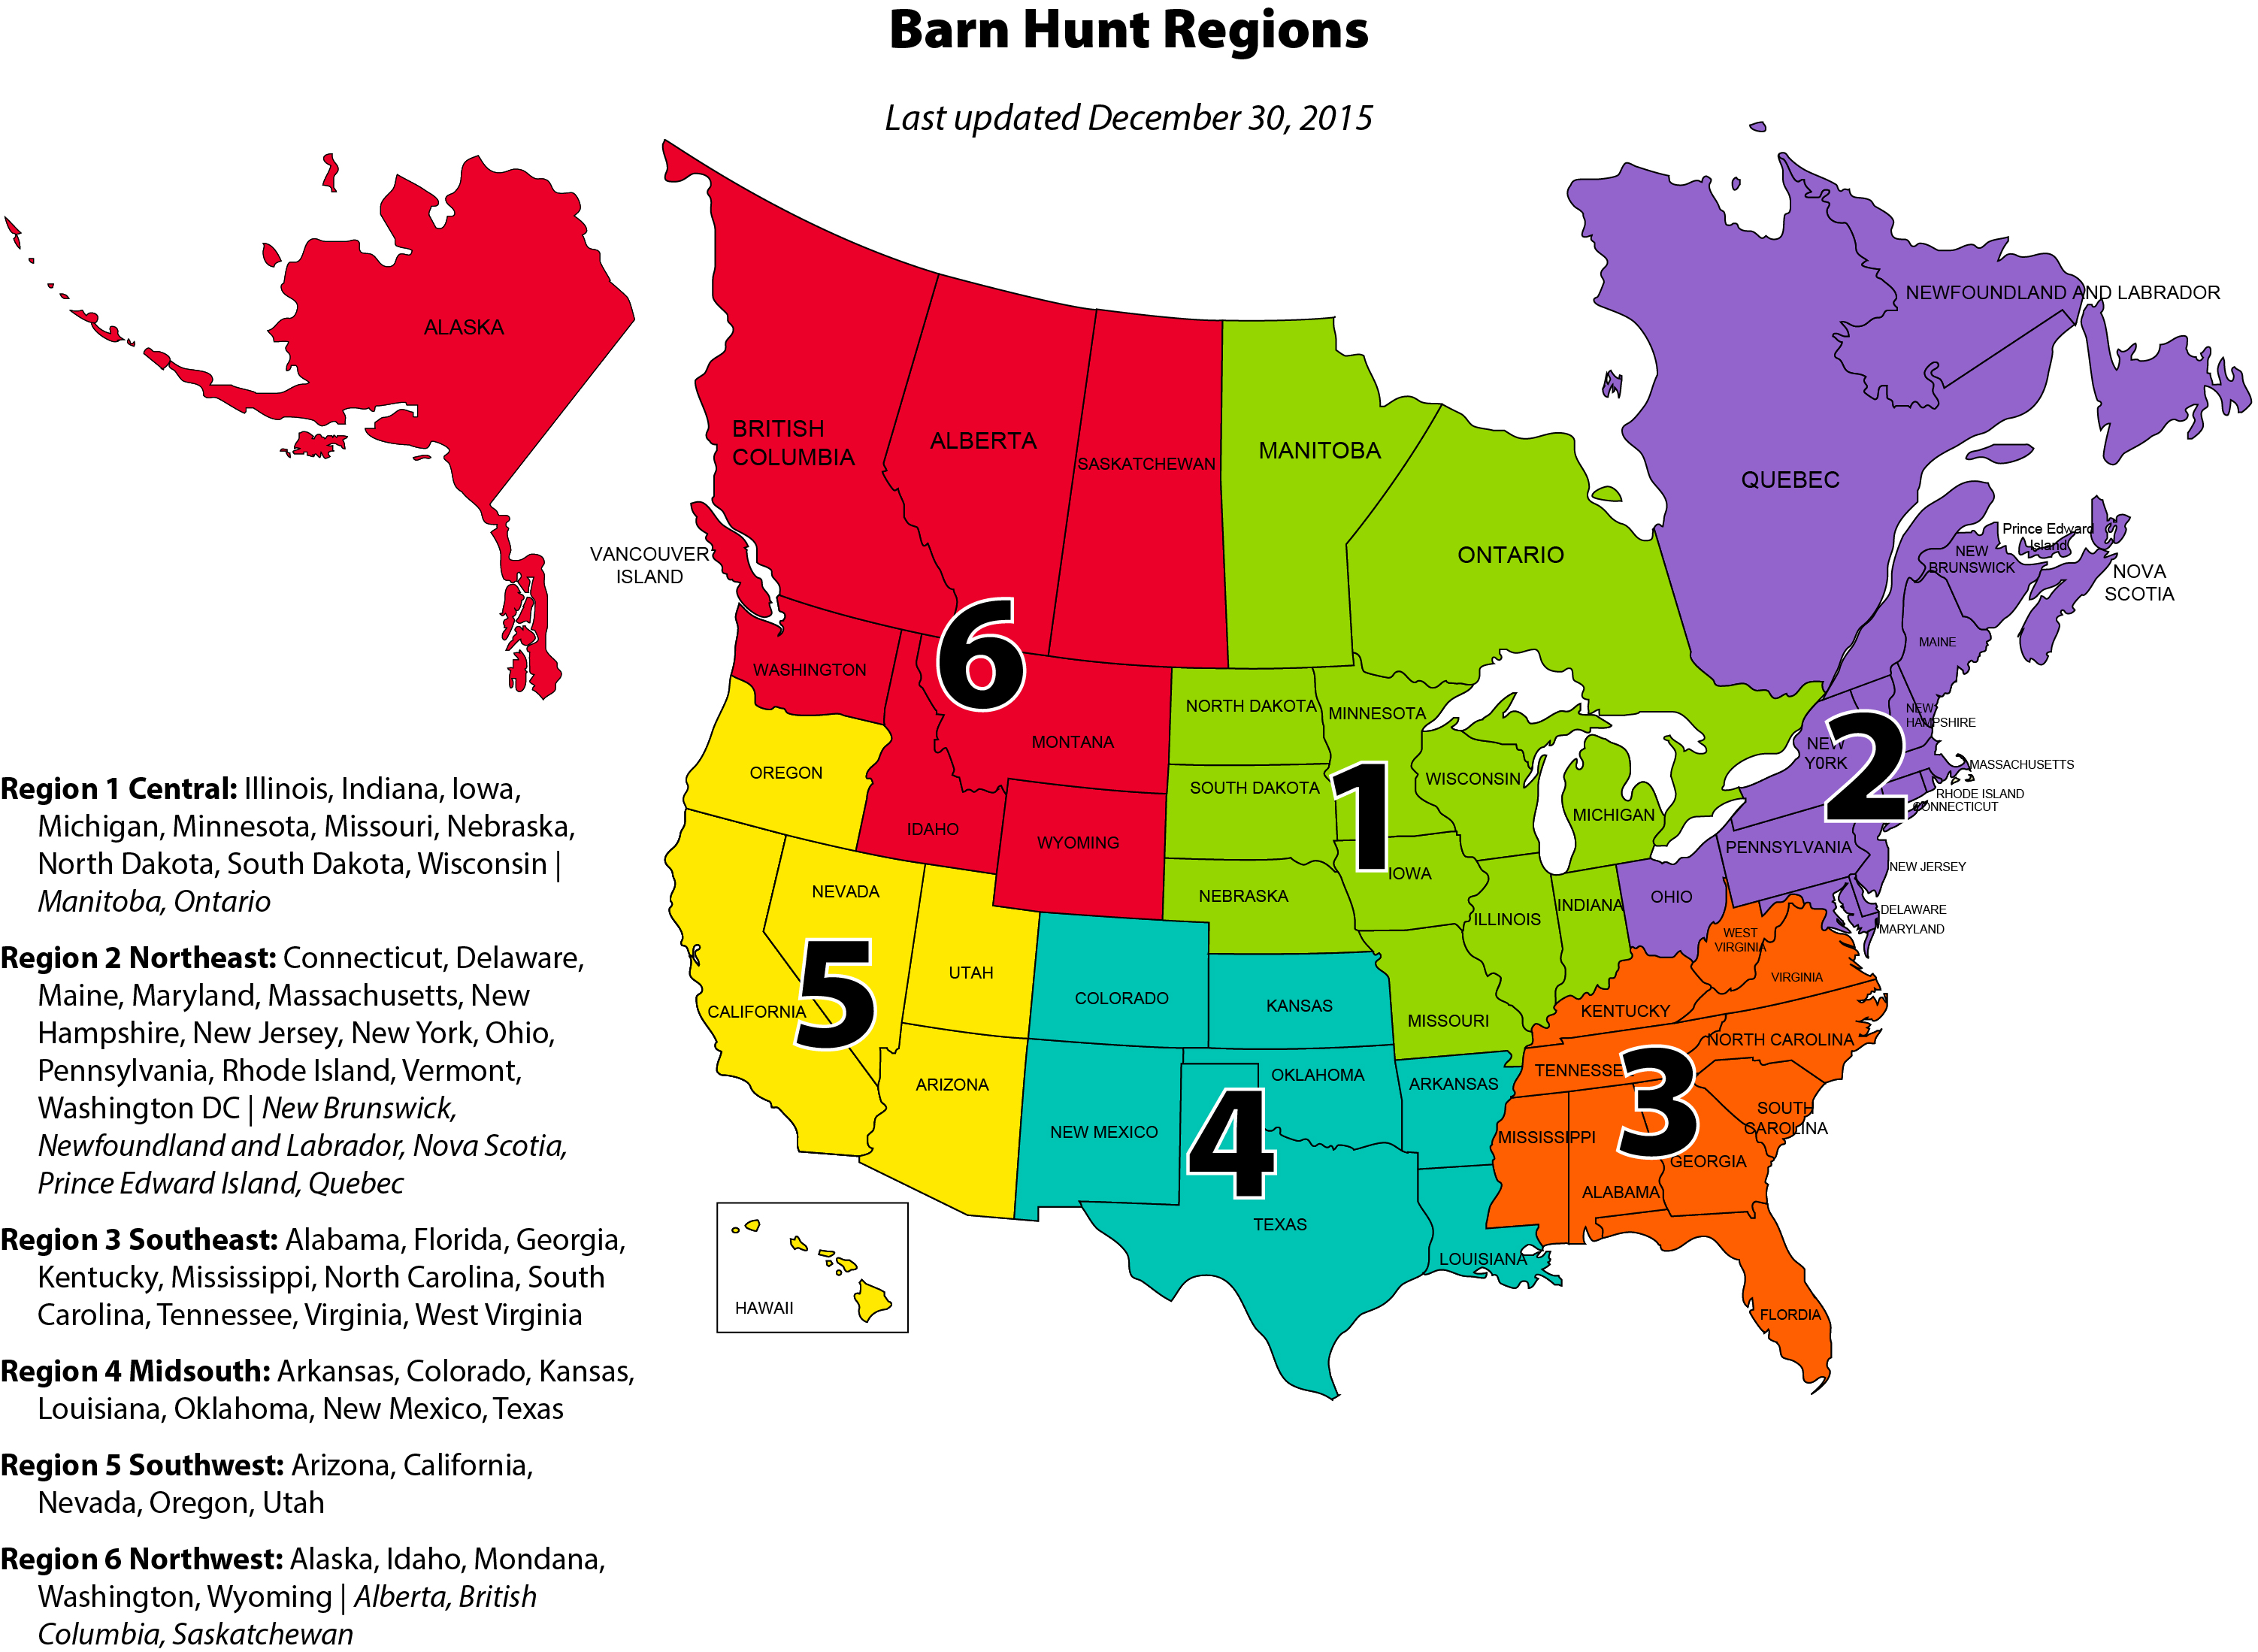 Color coded map of the Barn Hunt Regions in the U.S. and Canada